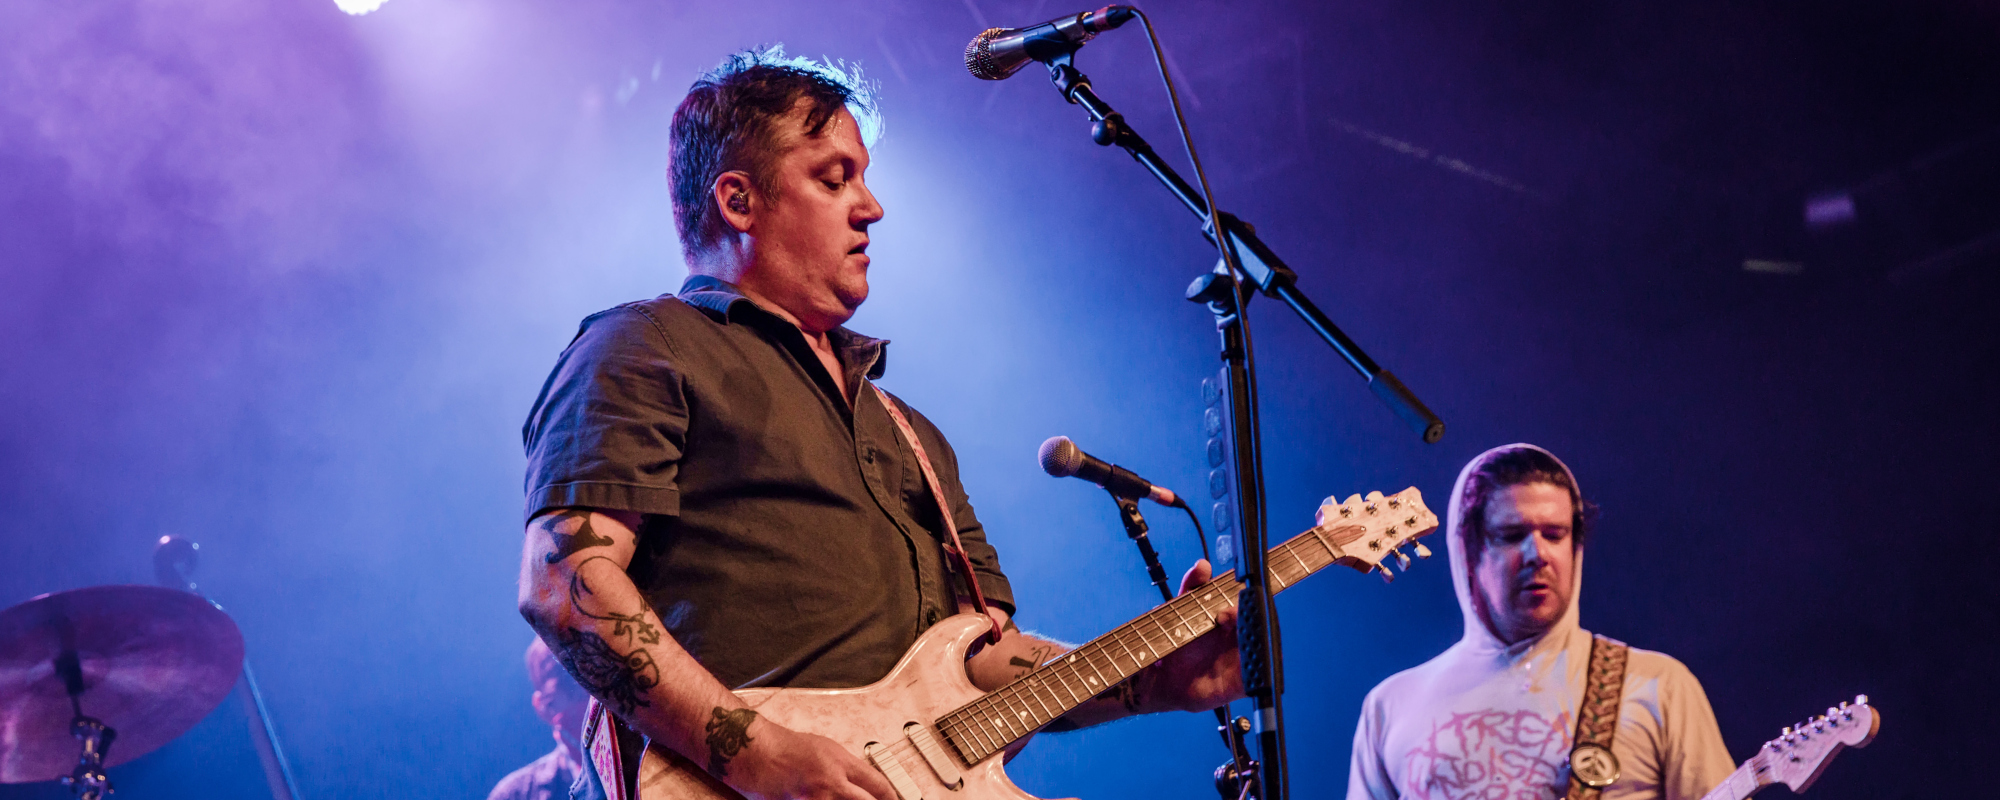 Modest Mouse Books First Show Since Death of Drummer, Jeremiah Green